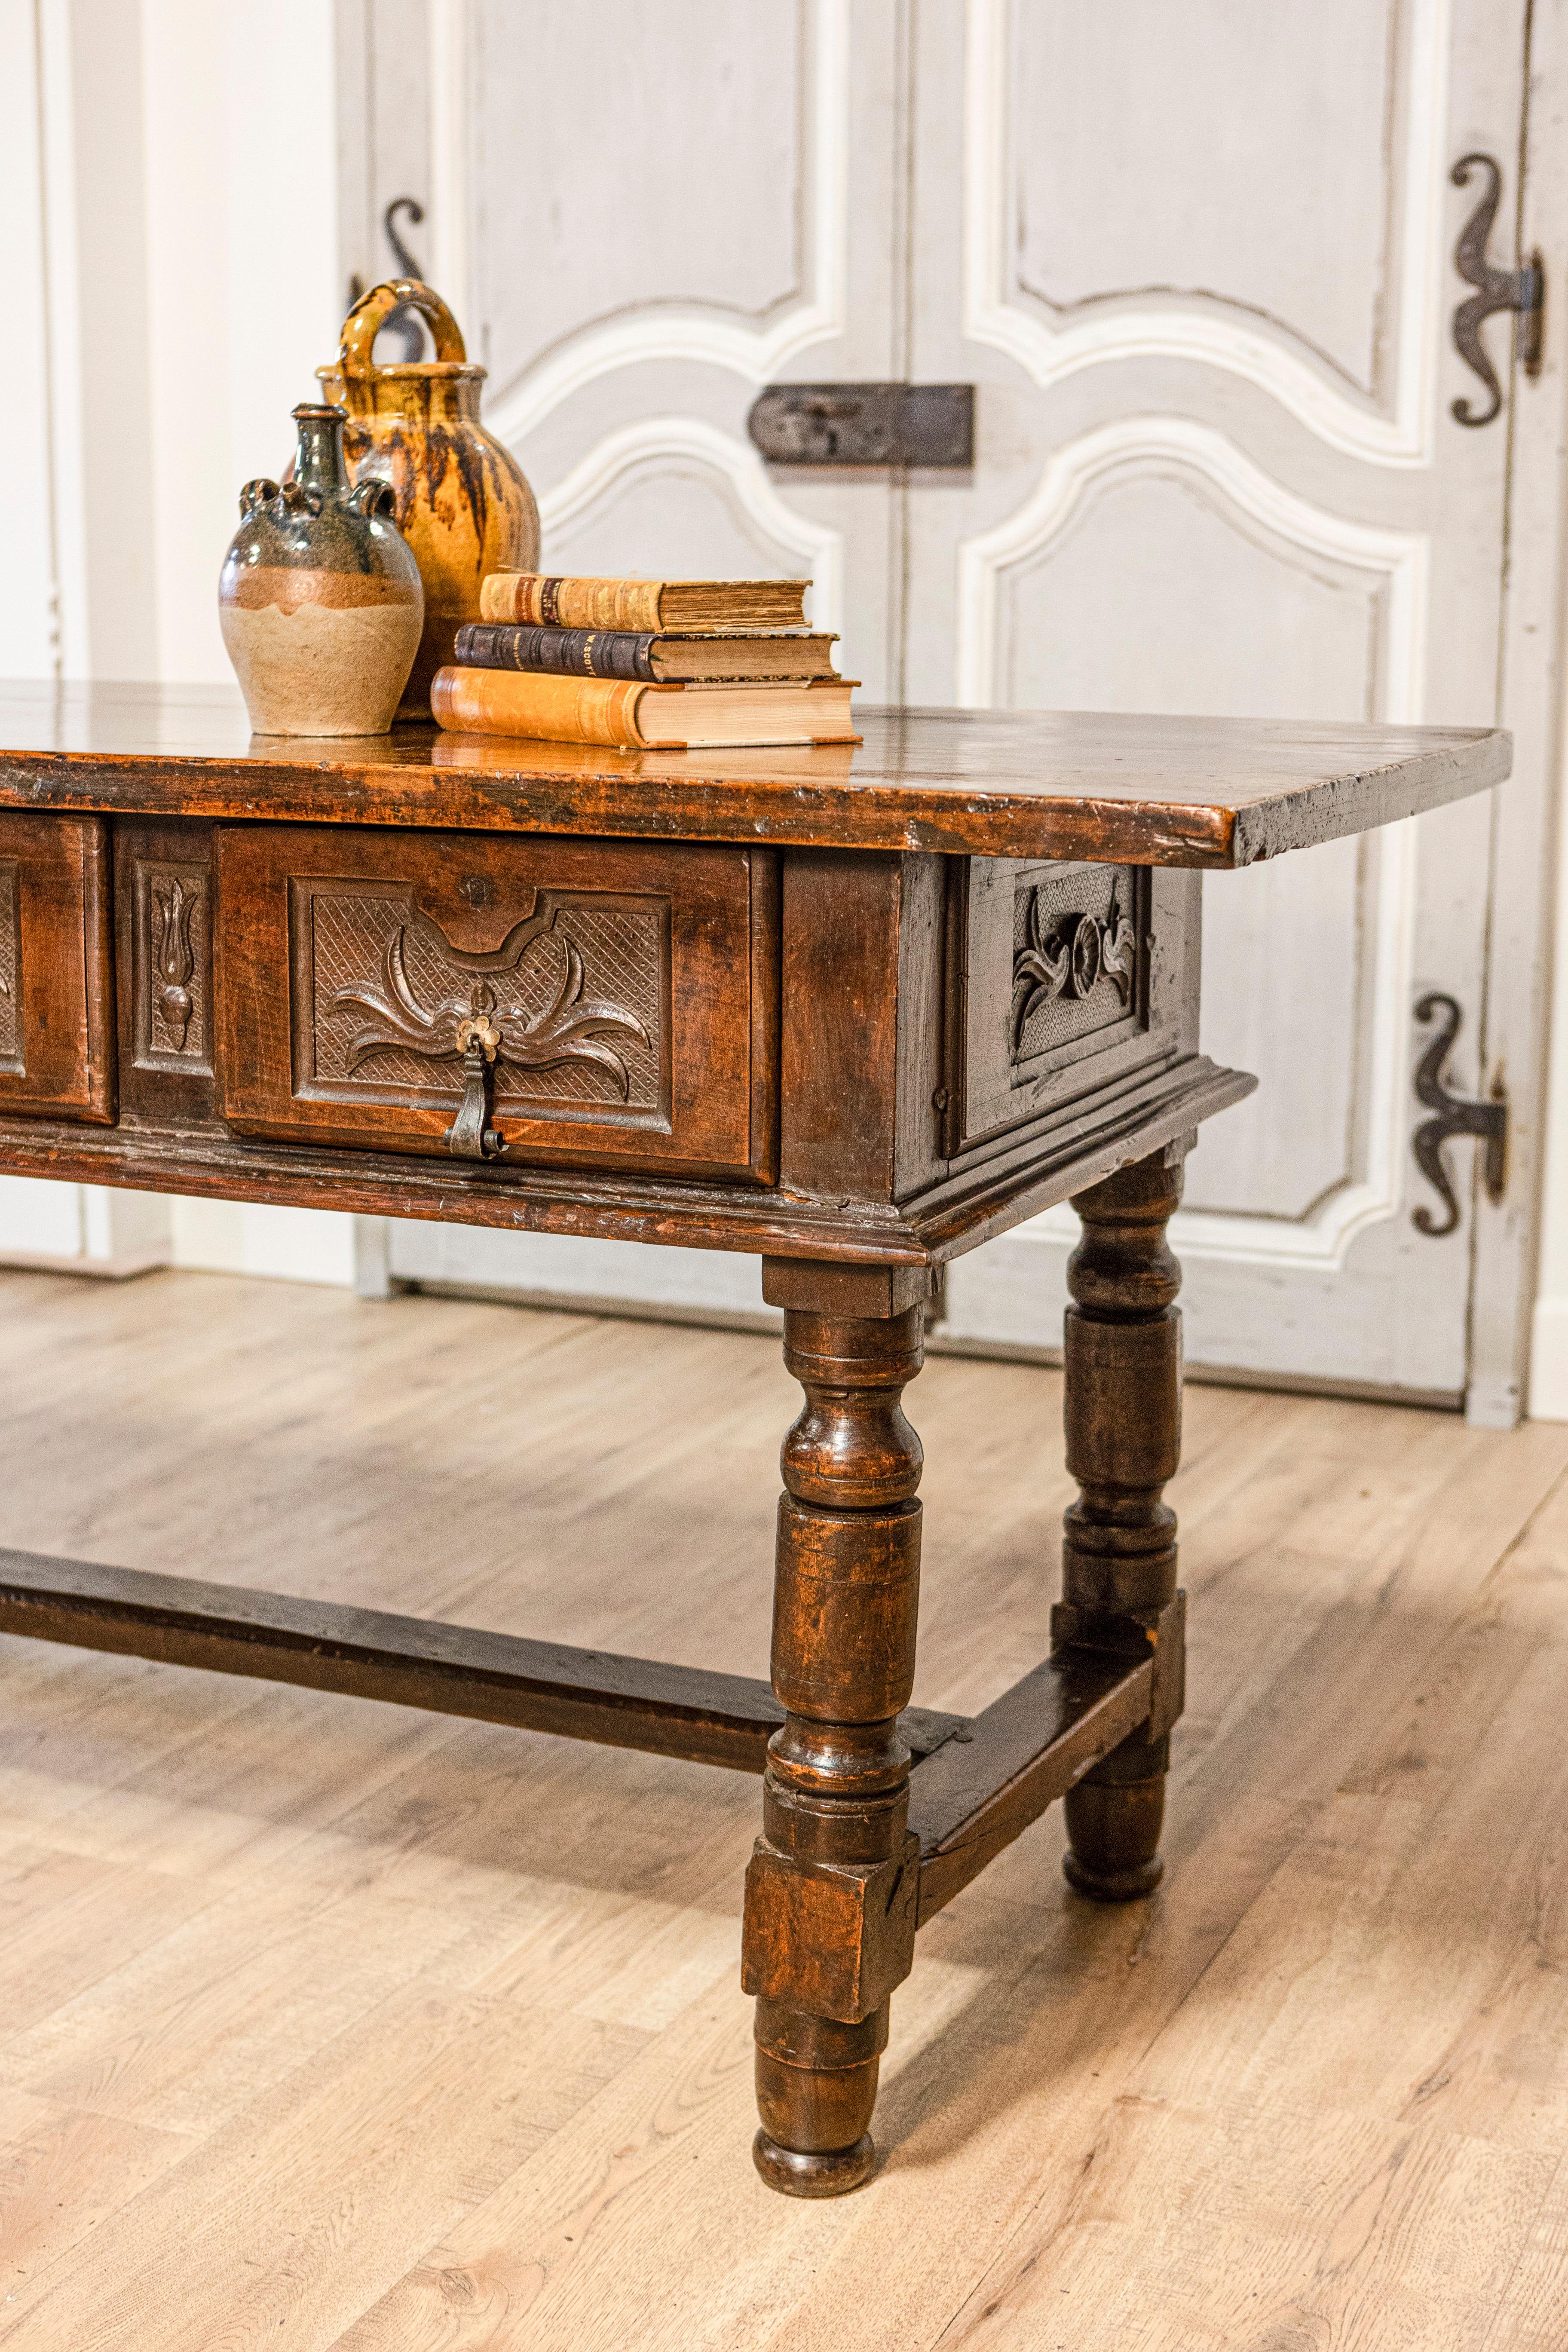 Spanish Baroque 17th Century Walnut Table with Carved Drawers and Turned Legs For Sale 8